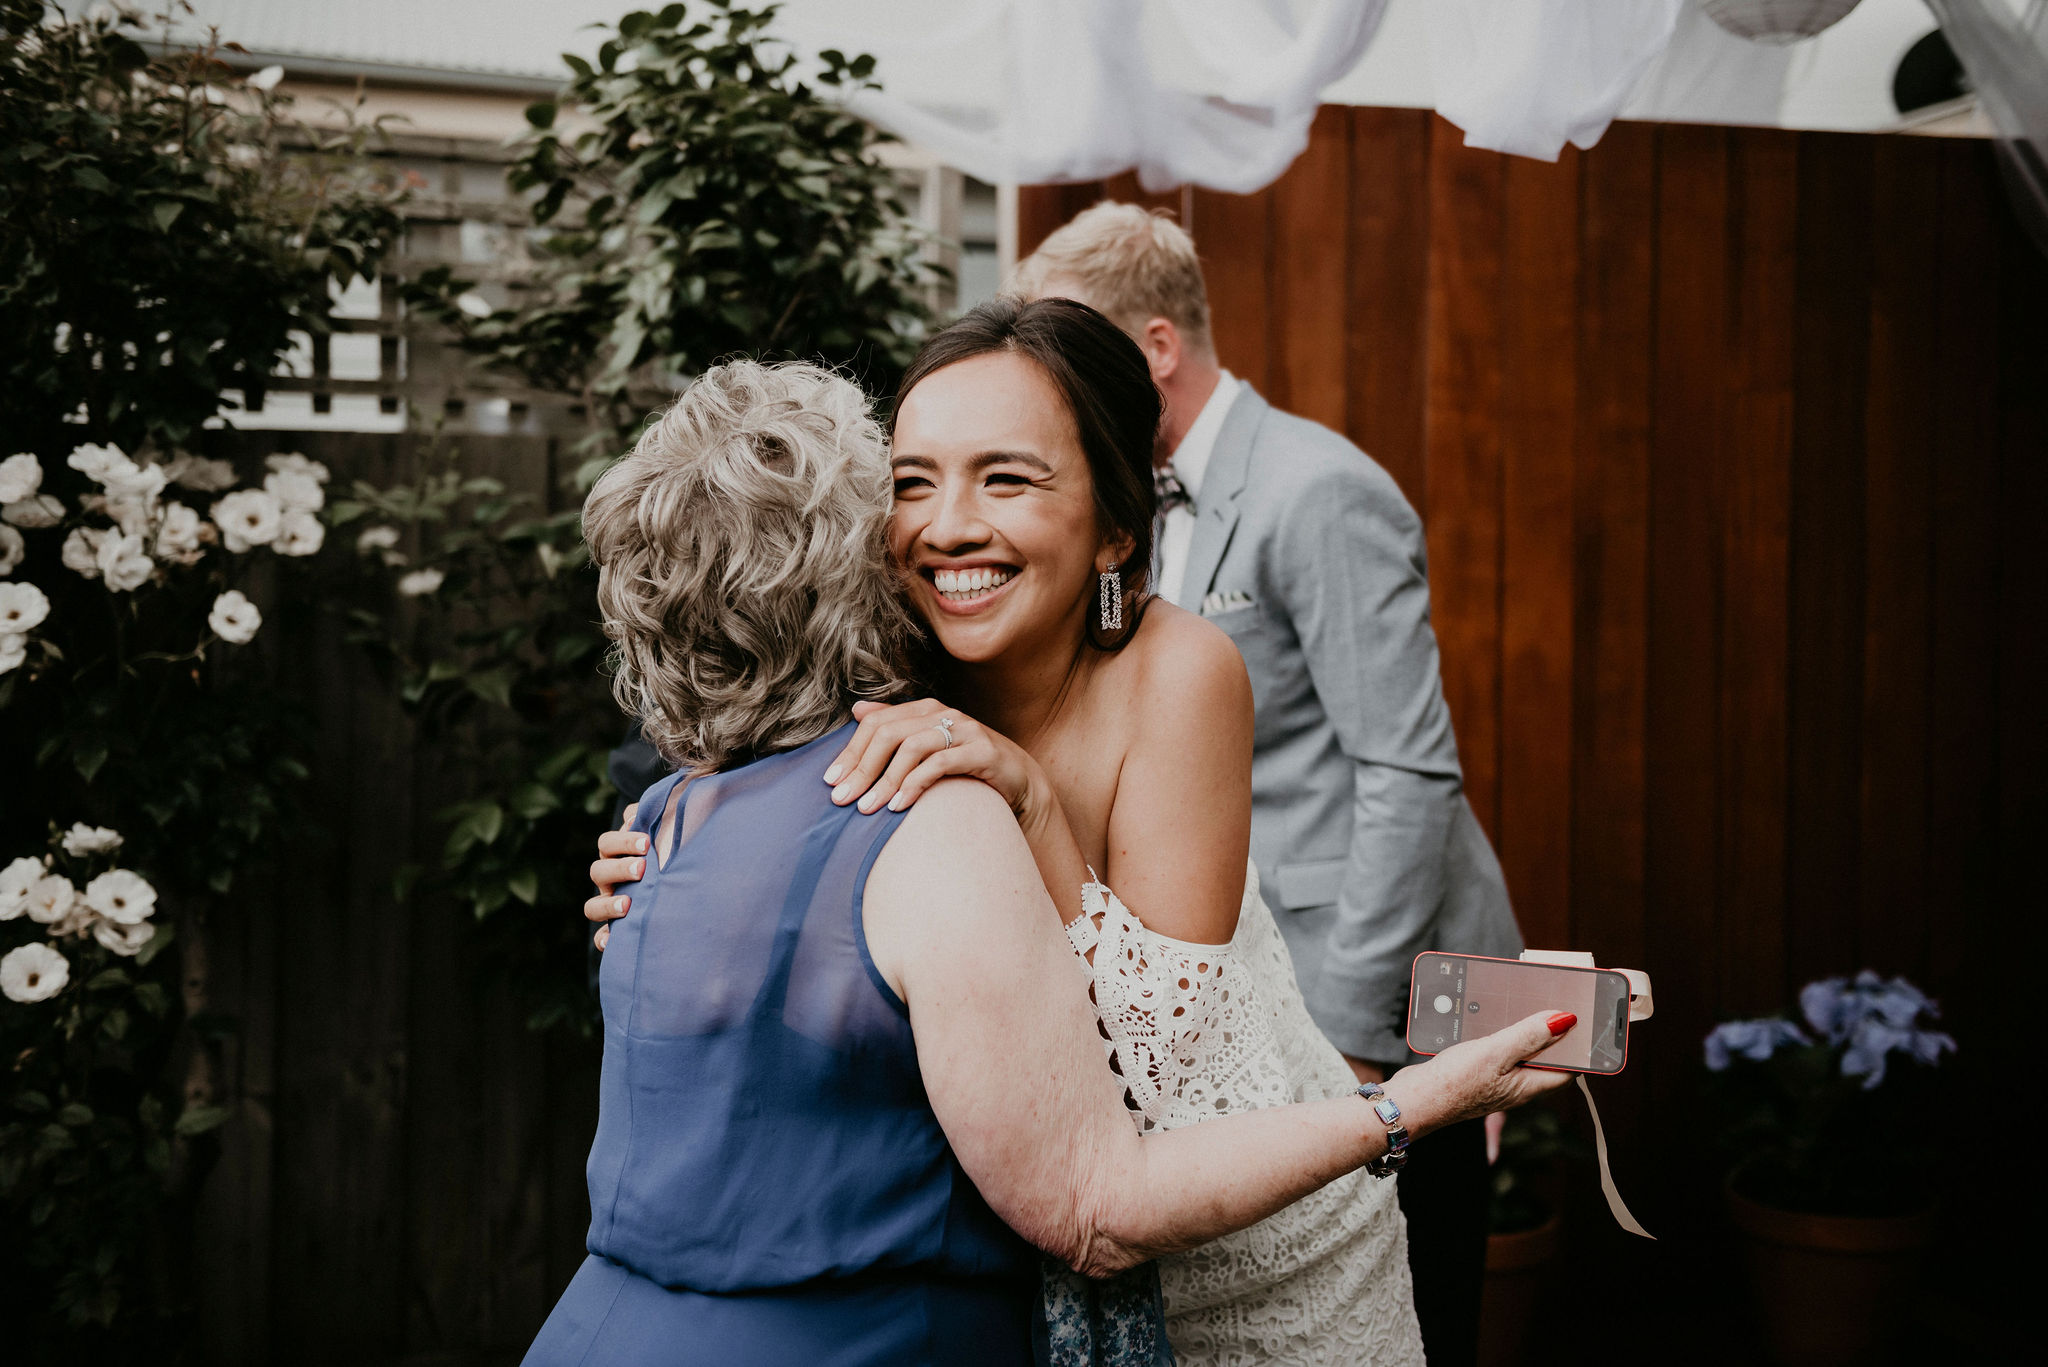 Lets-Elope-Melbourne-Celebrant-Photographer-Elopement-Package-Victoria-Sarah-Matler-Photography-Elope-at-Home-Footscray-weddings-intimate-11